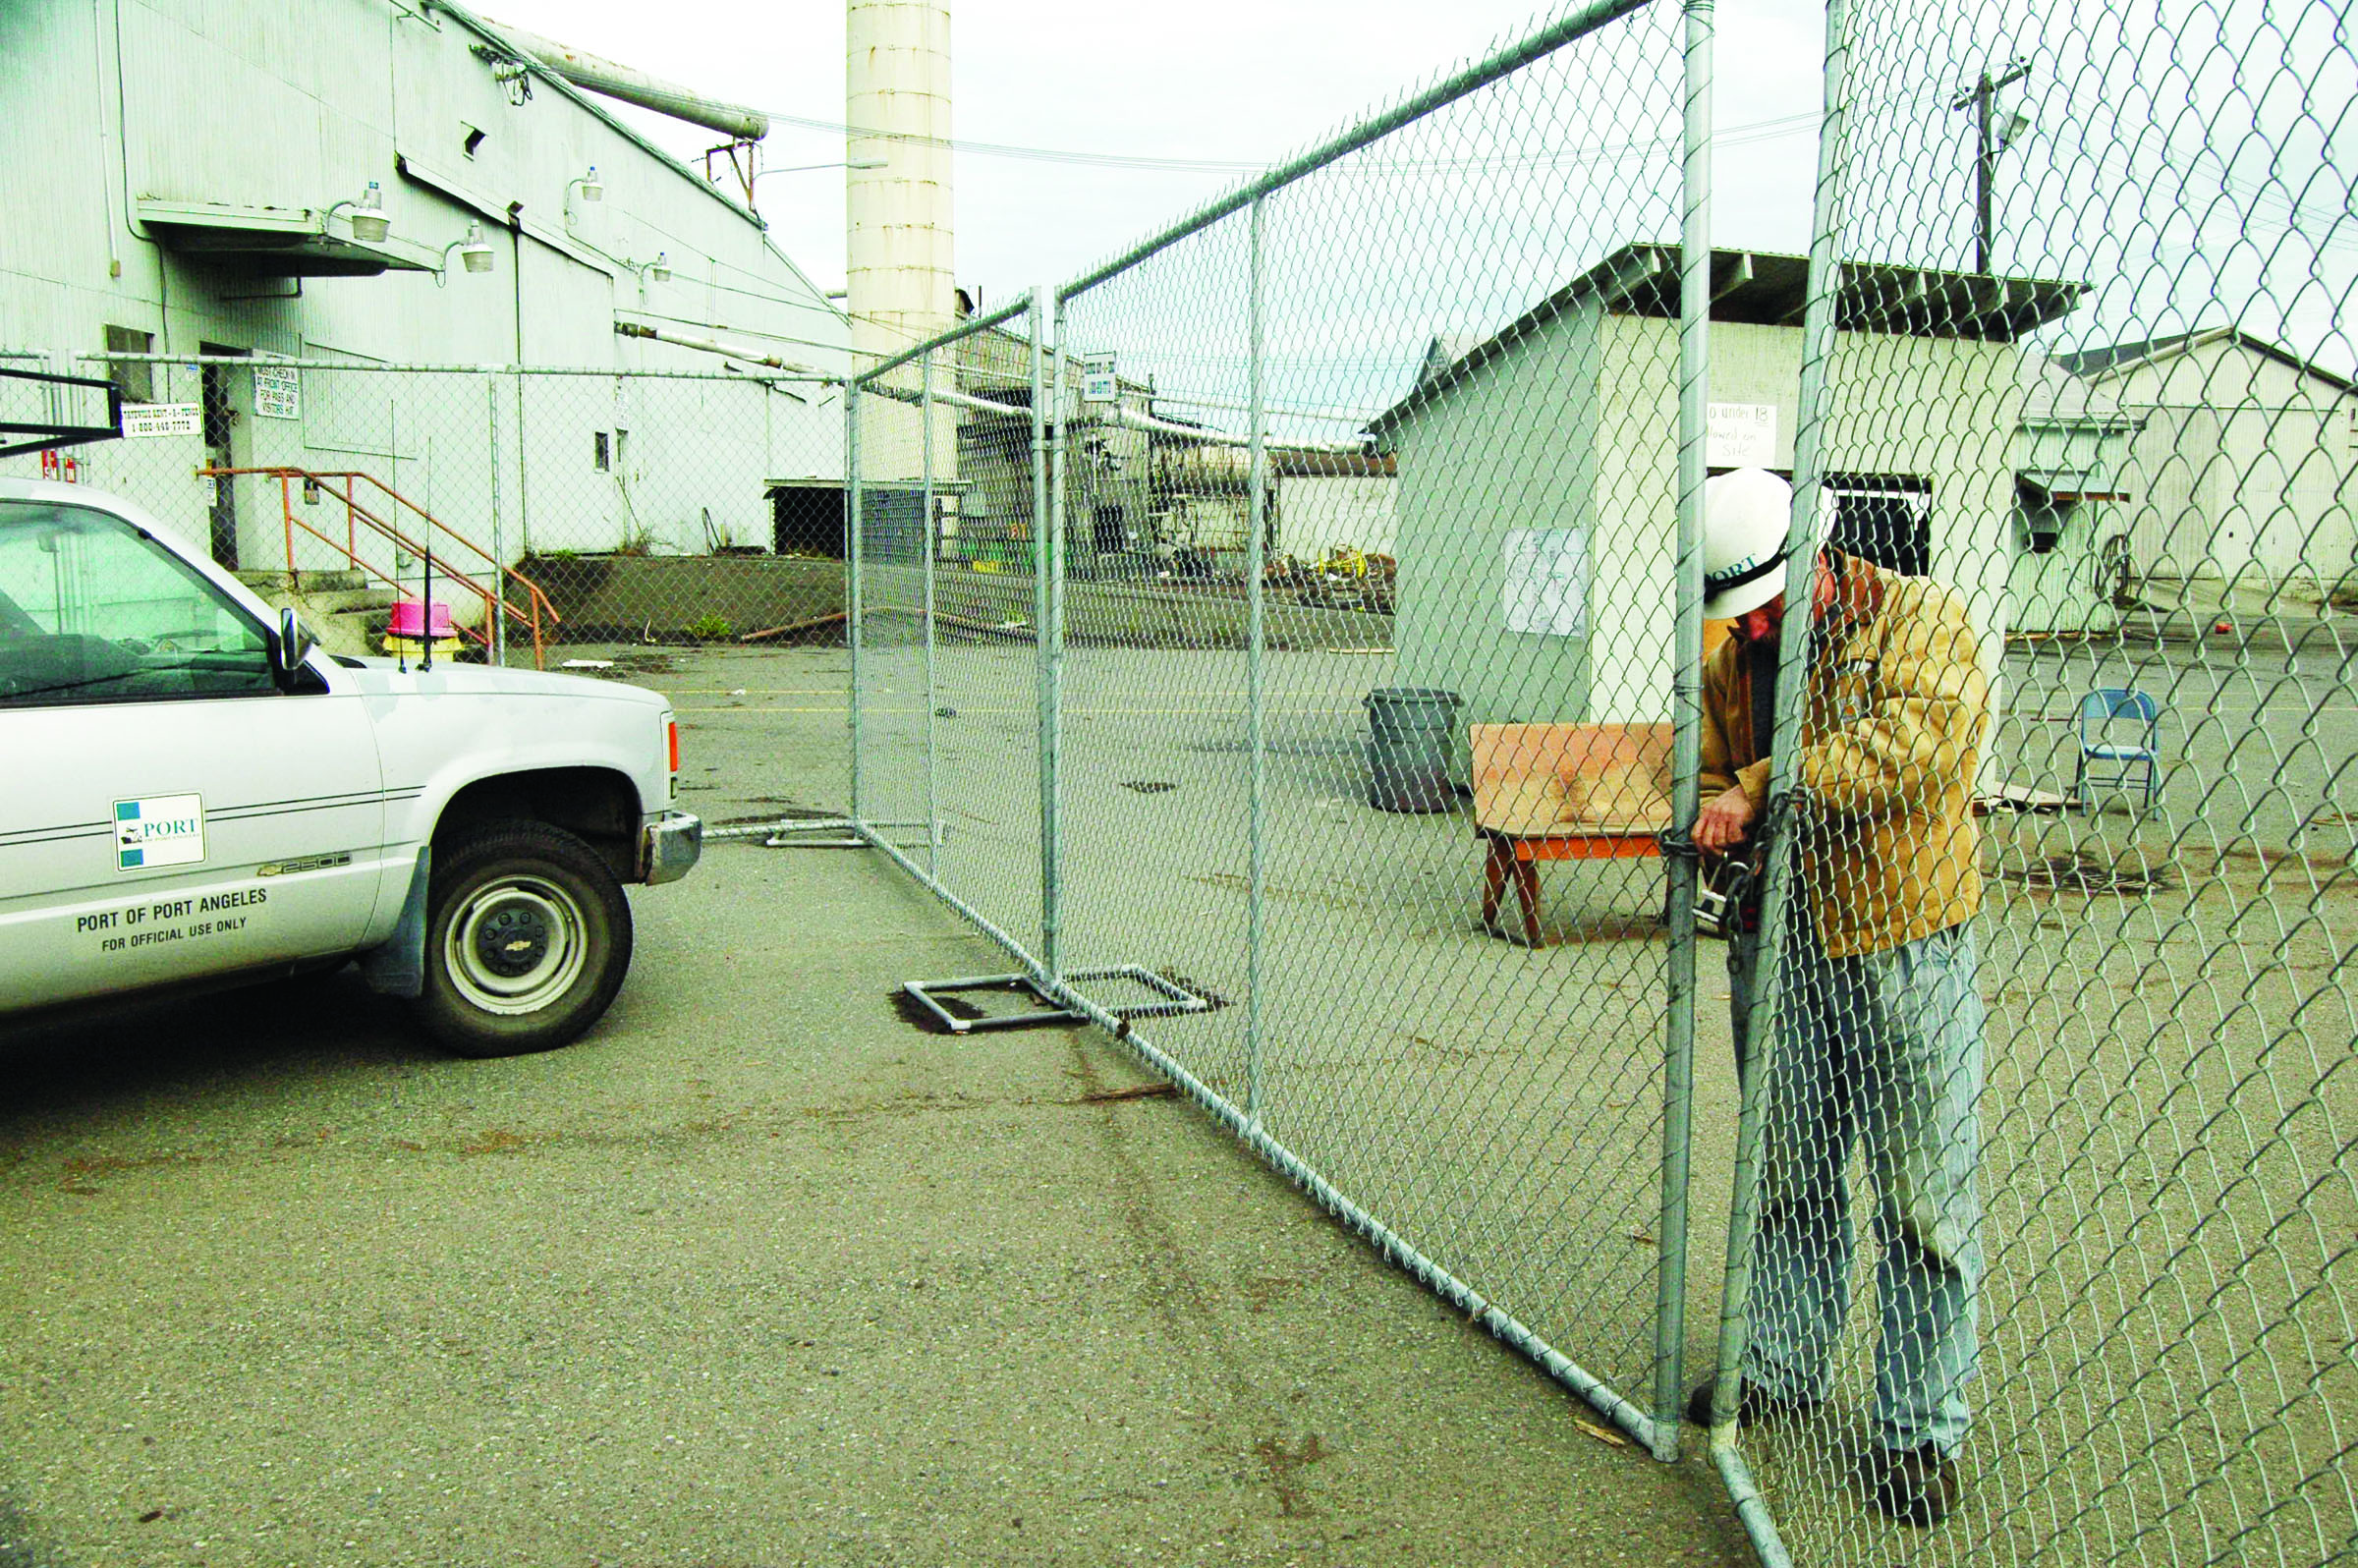 Port of Port Angeles facilities maintenance worker Bob Beaudette locks the gate to the former PenPly plywood mill